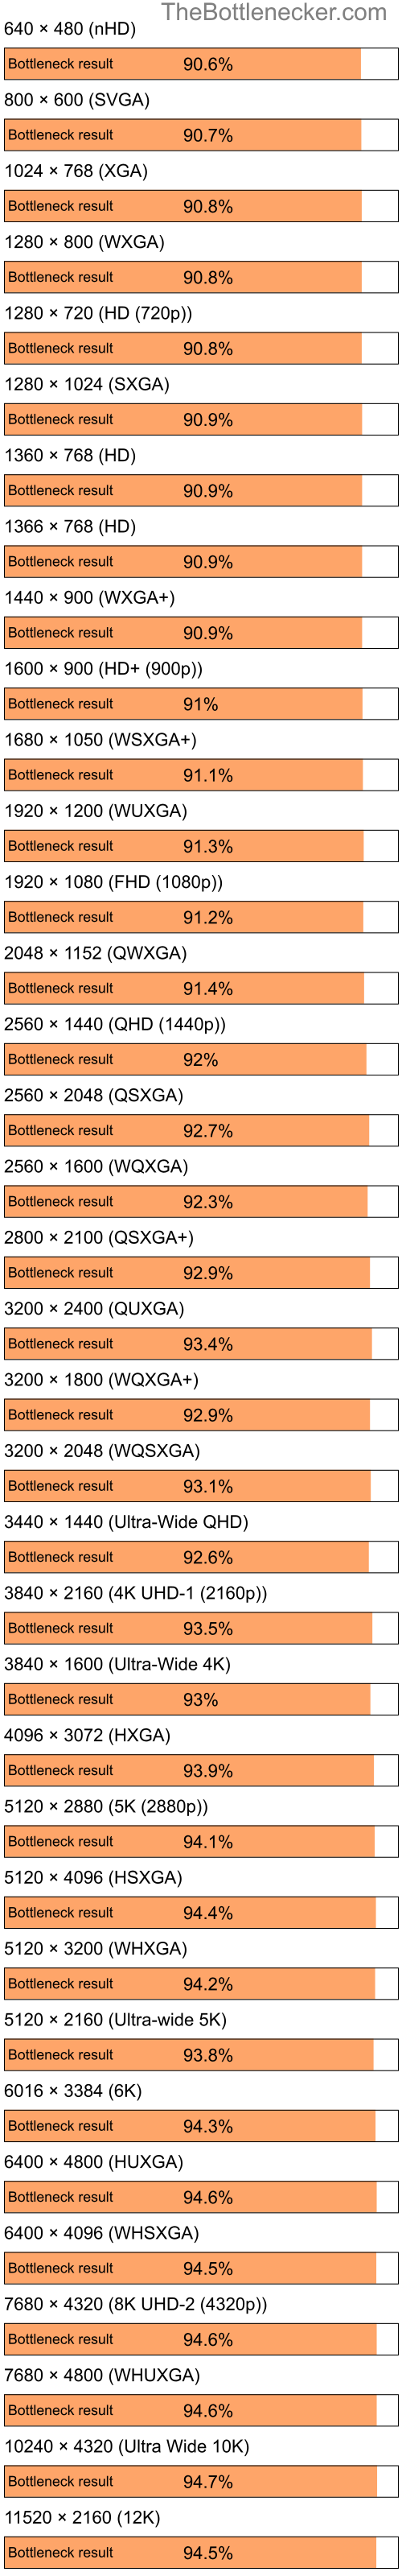 Bottleneck results by resolution for Intel Celeron and AMD Mobility Radeon 9000 in7 Days to Die